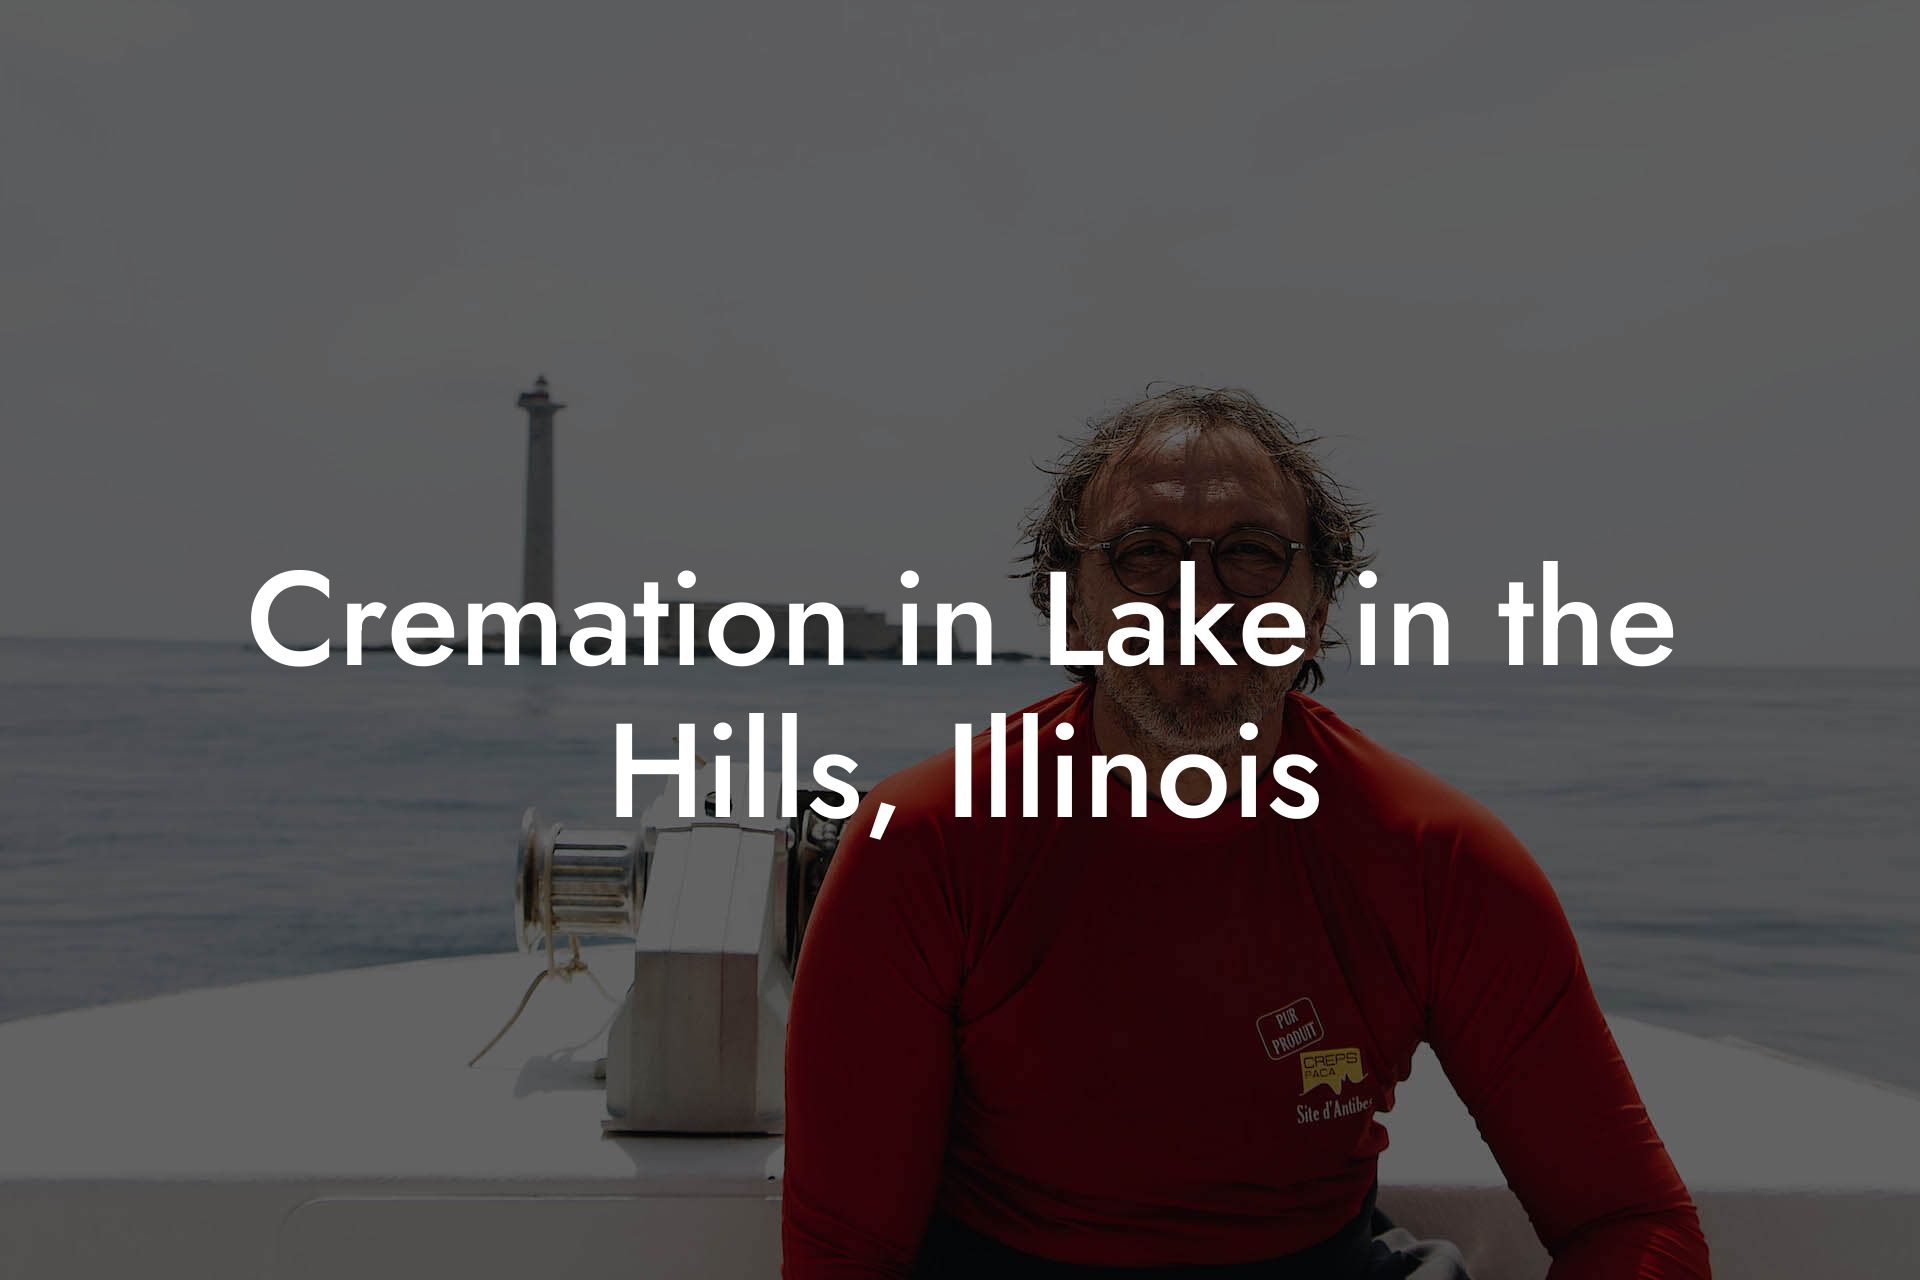 Cremation in Lake in the Hills, Illinois